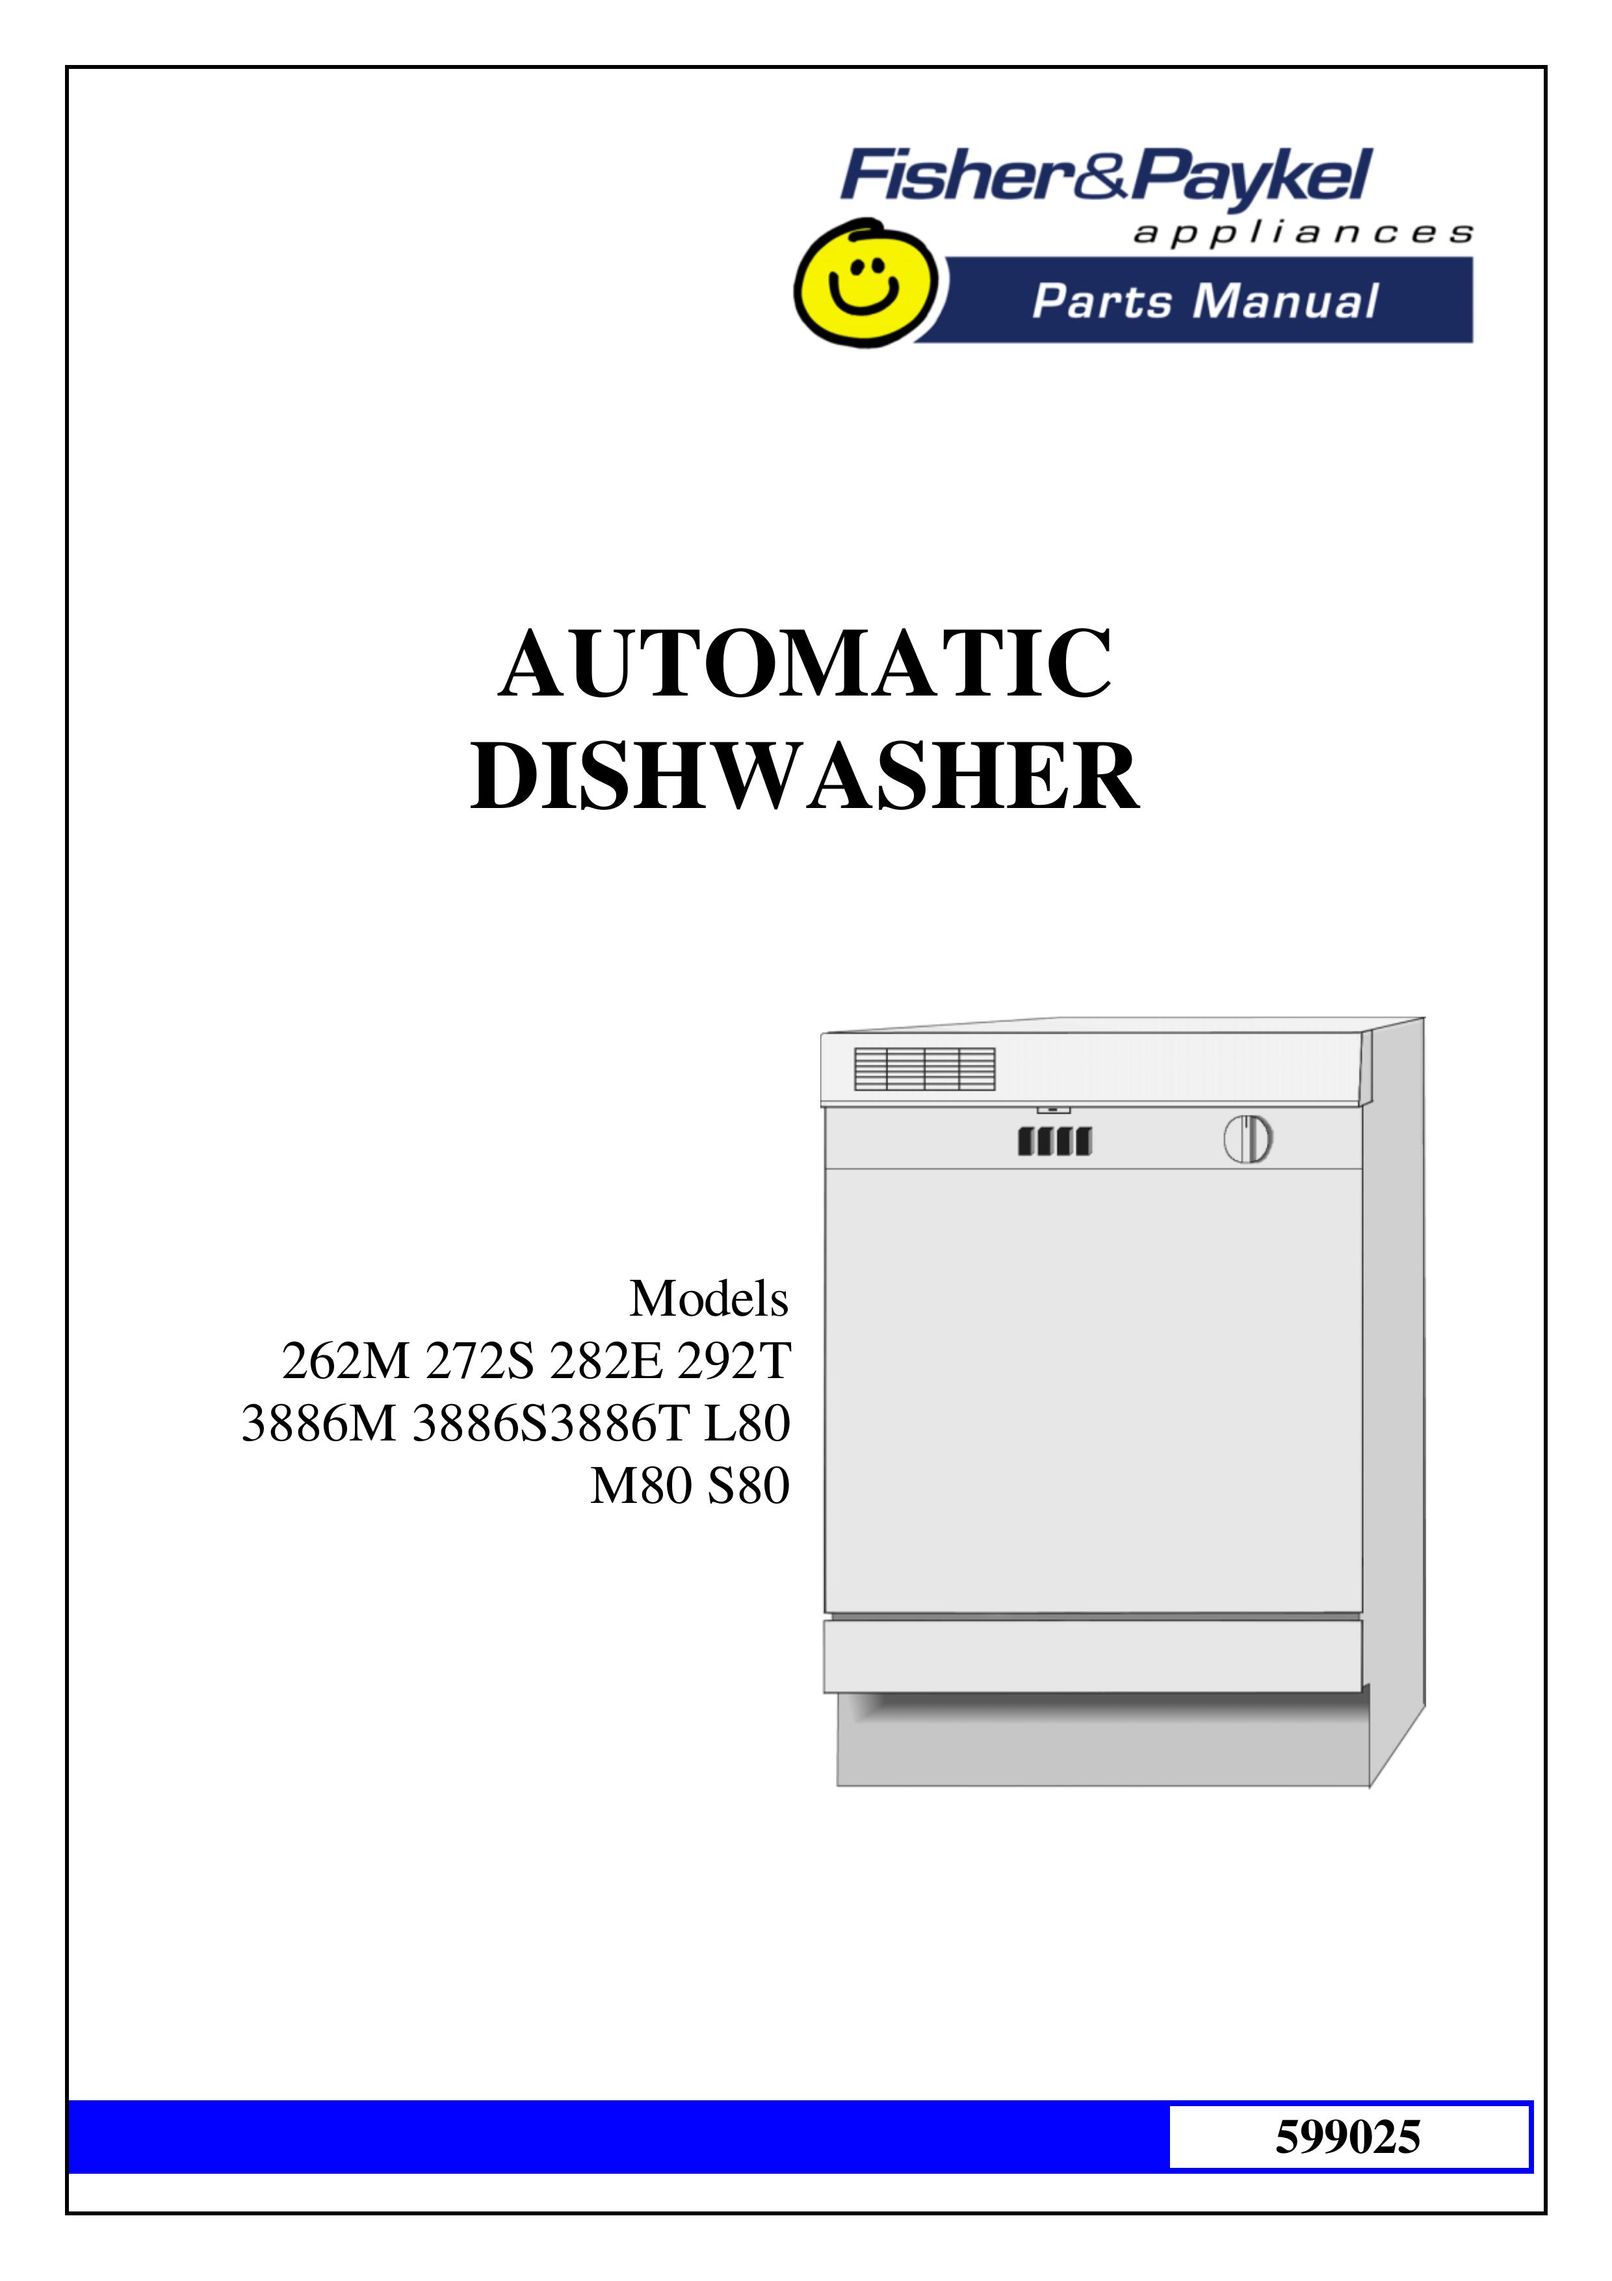 Fisher & Paykel 3886S3886T Dishwasher User Manual